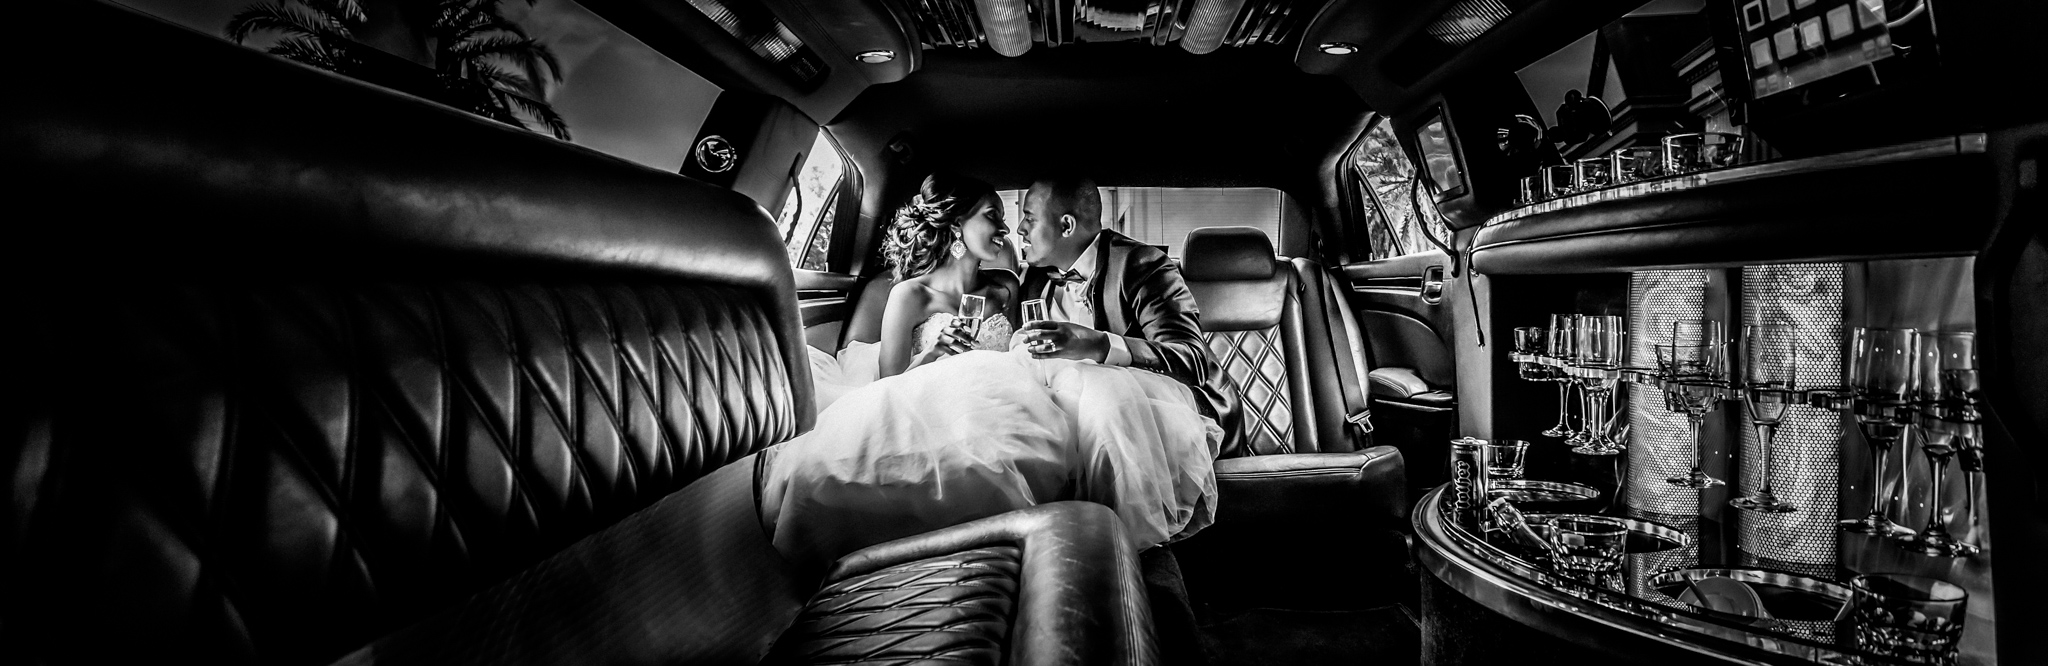 Wedding Photography and Video Melbourne